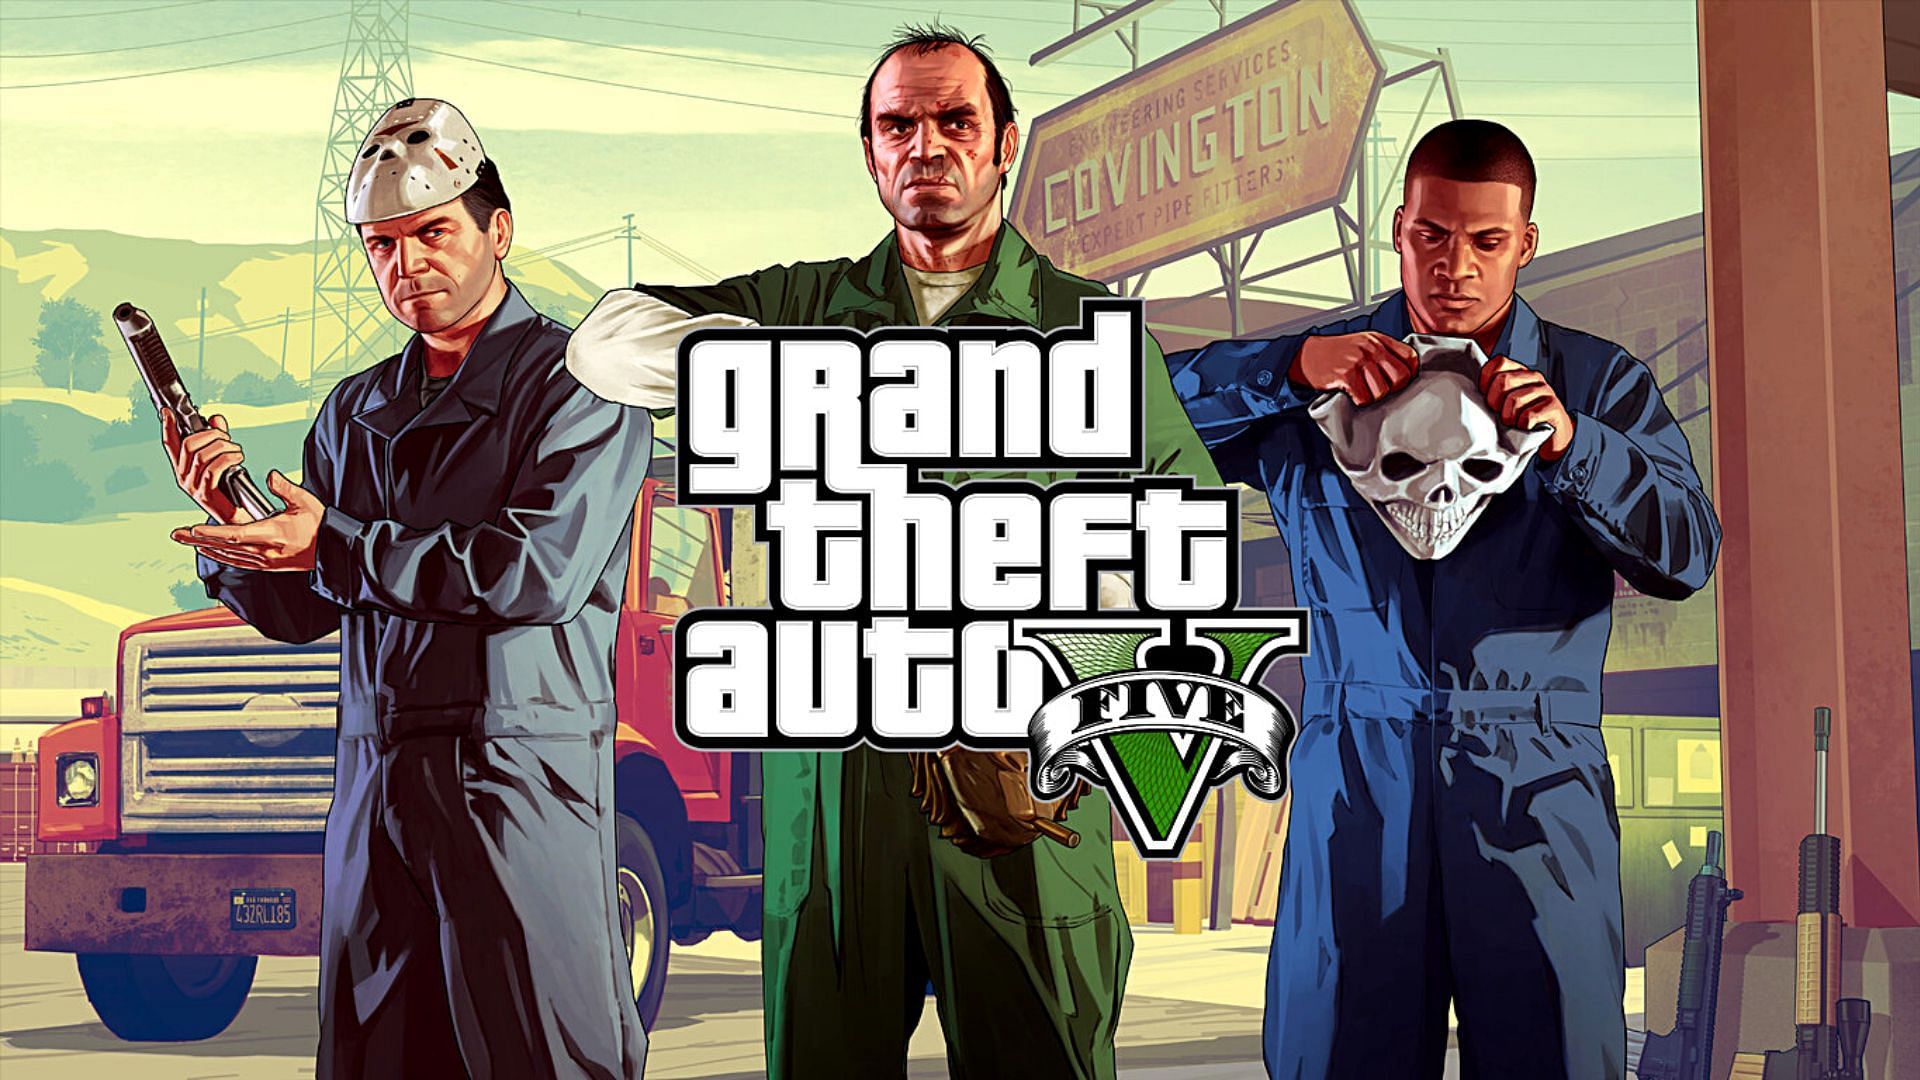 A brief report on GTA 5 selling over 190 million copies worldwide, as per Take-Two Interactive